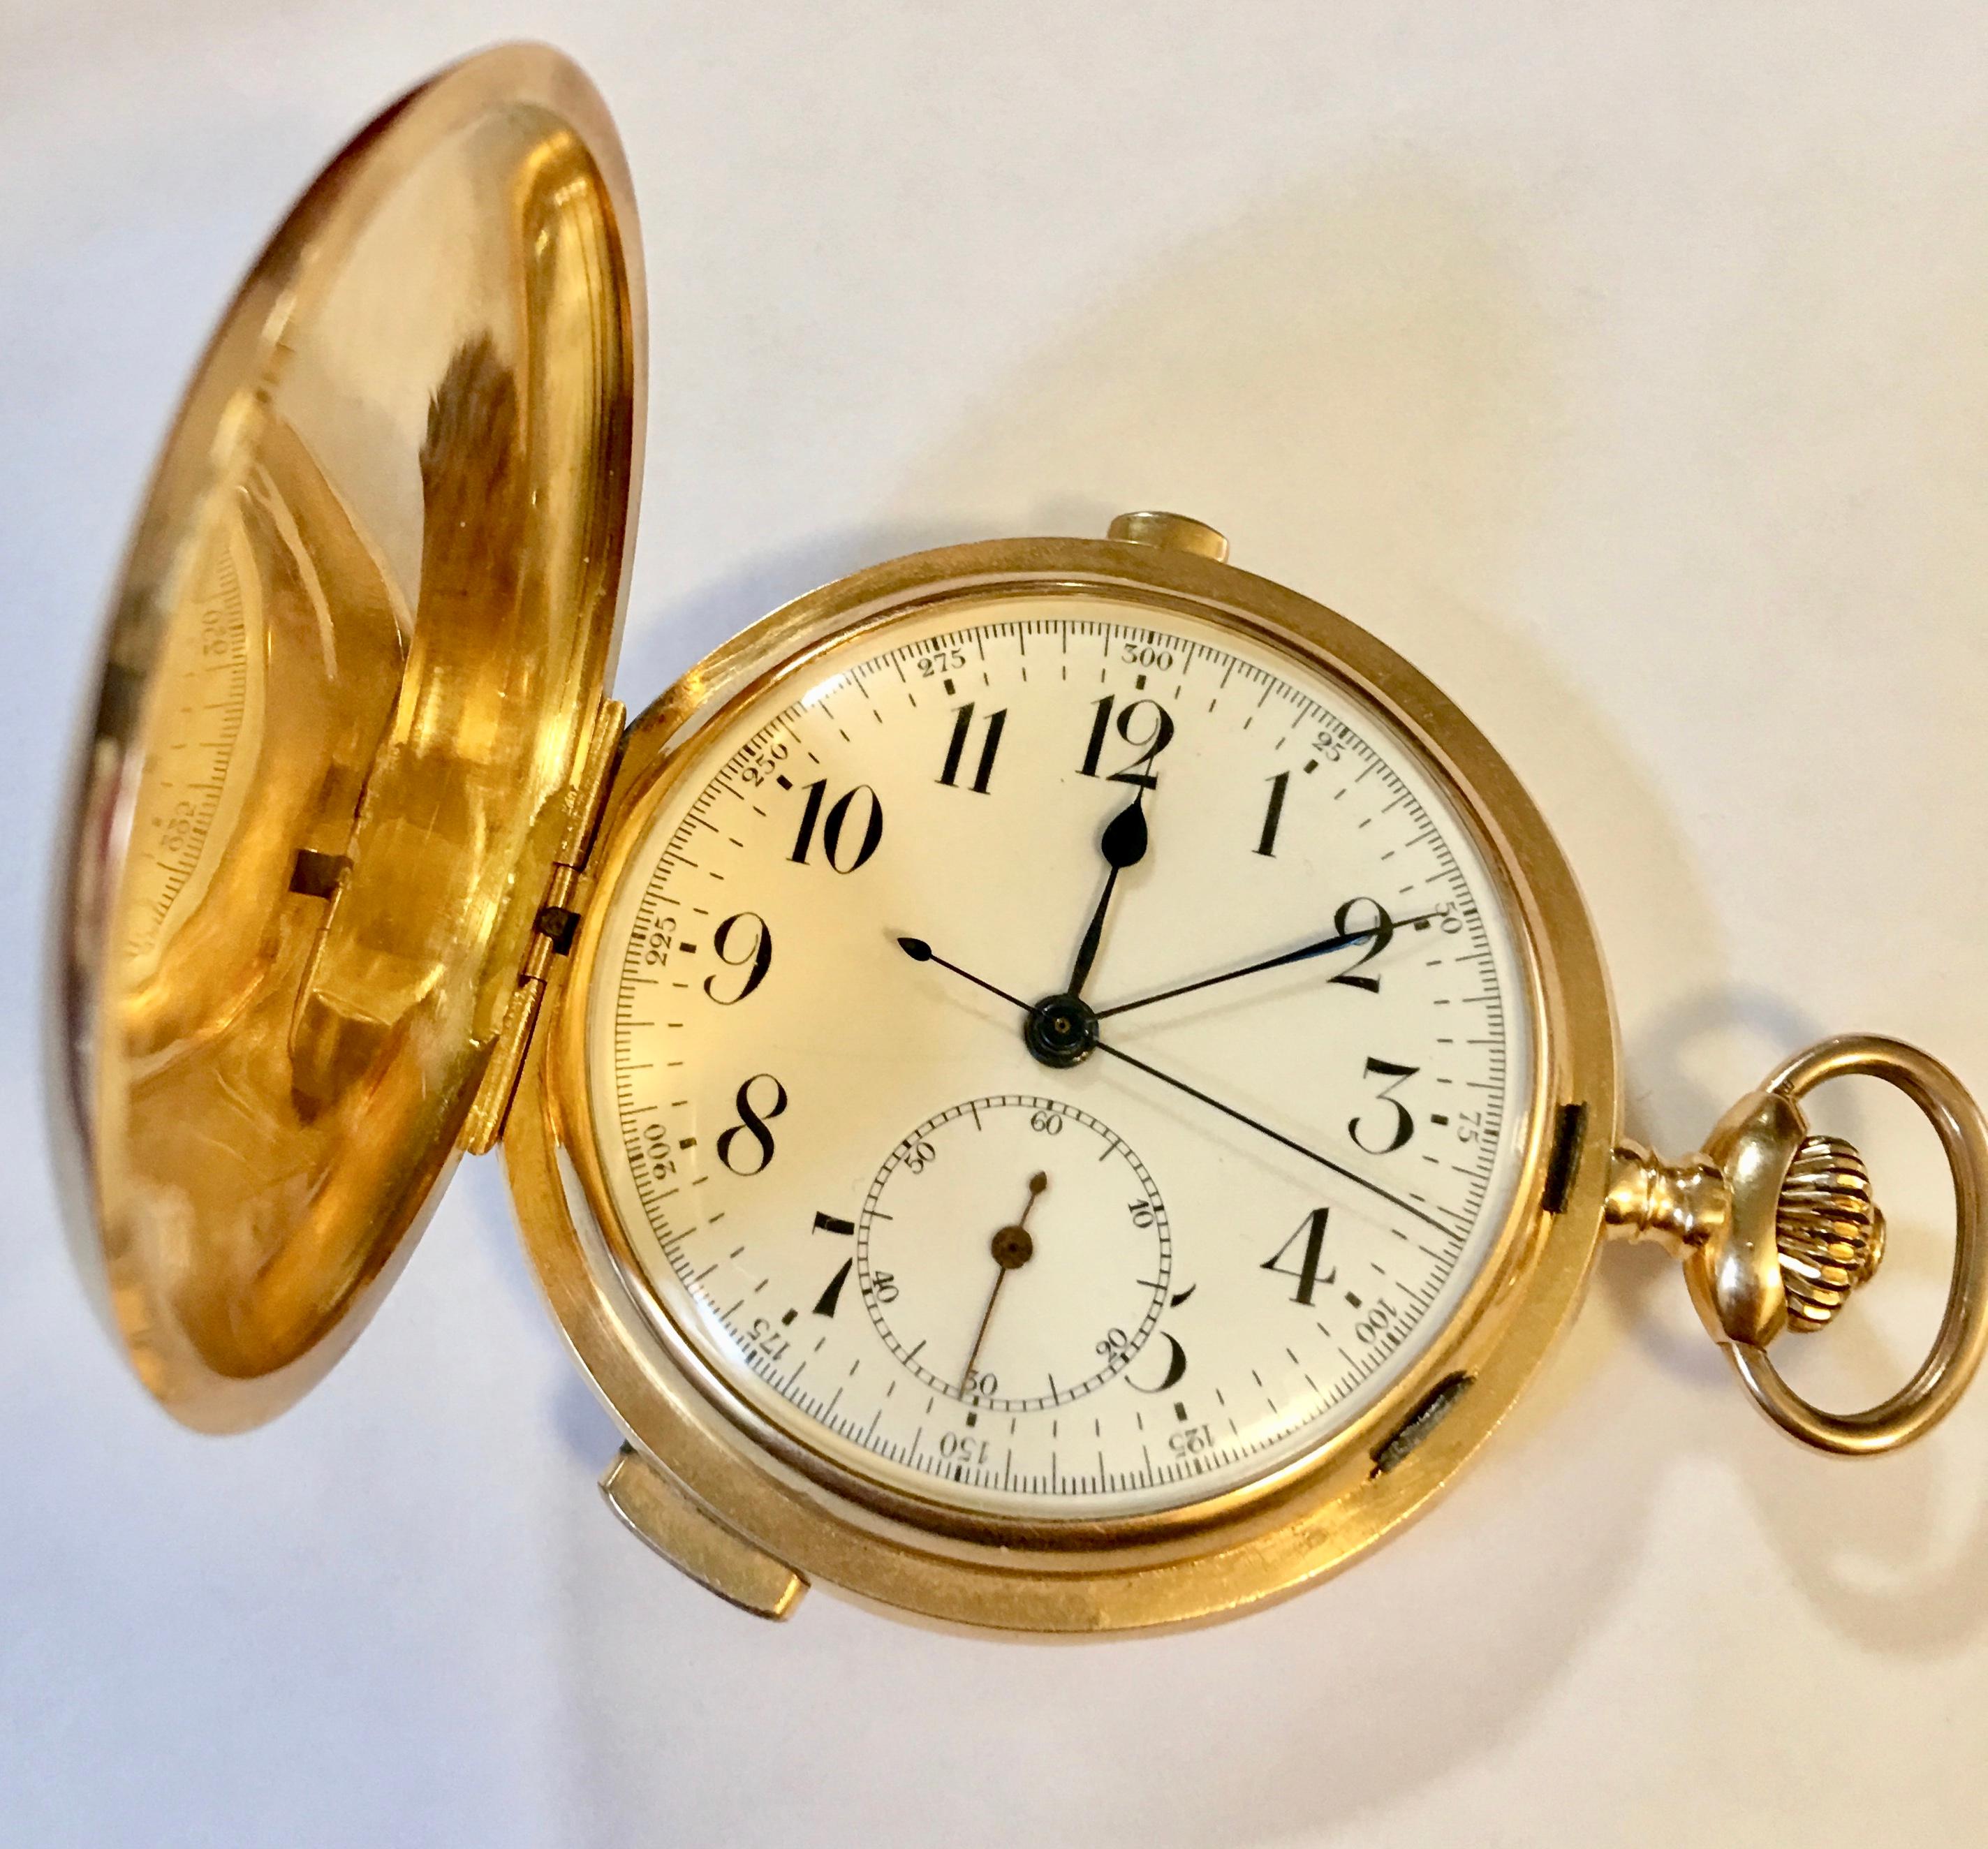 A  superb high grade Swiss made full hunter 18k Gold minute repeater pocket watch. This superb watch has a white enamel dial with Roman numerals and a seconds subdial. With a minute track and outer 1/5th seconds division on one minute scale on the